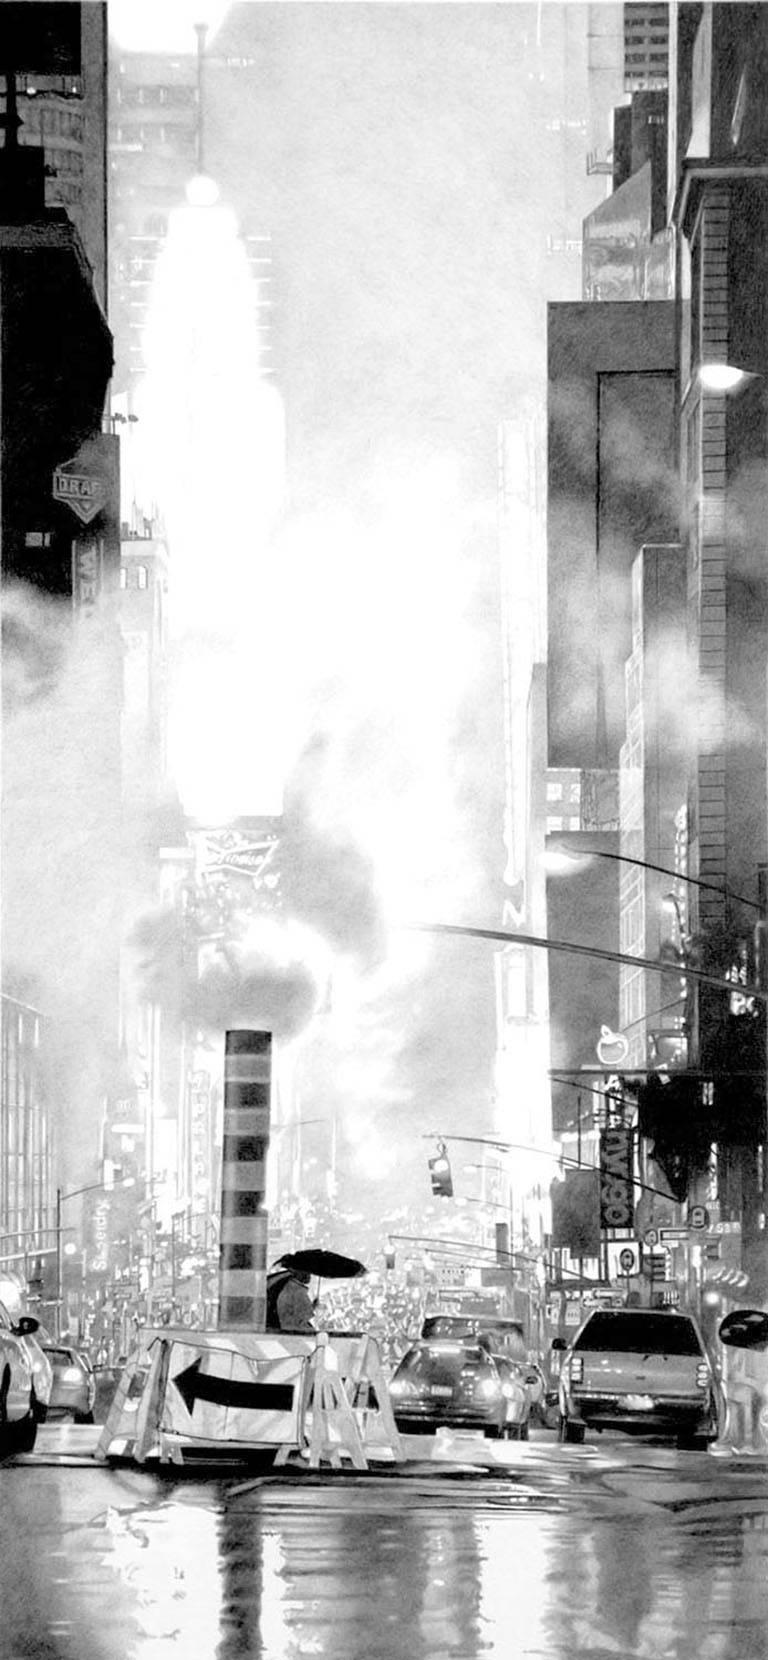 Roger Watt's monochromatic, "7th Avenue", depicts the urban cityscape of New York City. The work’s interesting composition allows one to focus on the Watt’s use of light, which provides a hazy quality to the work. The light reflects off of the